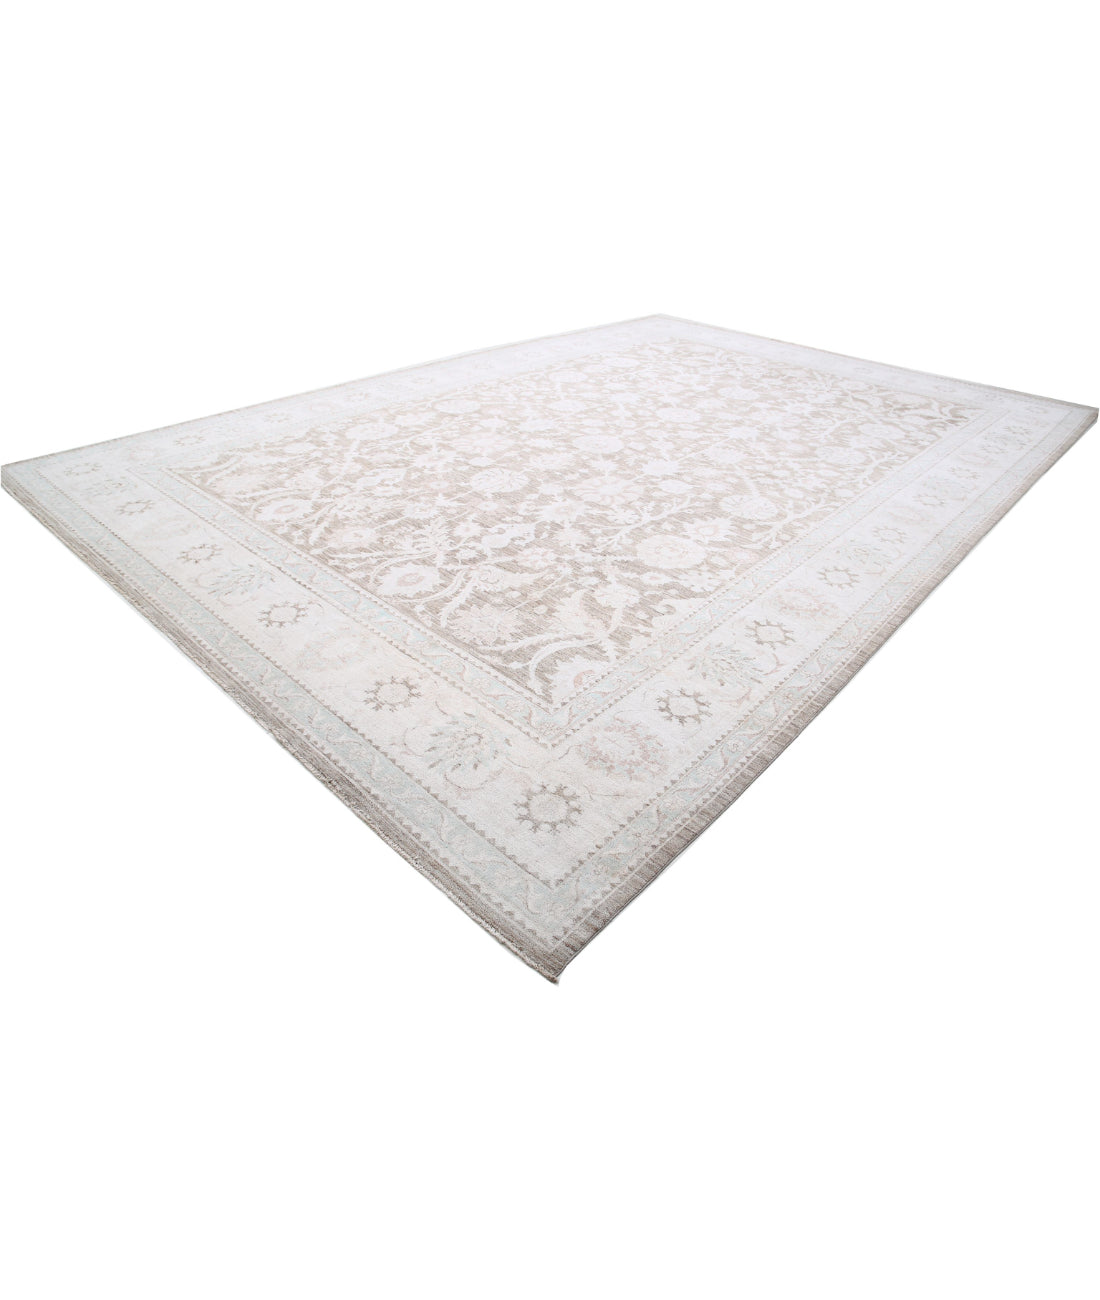 Hand Knotted Serenity Wool Rug - 12'10'' x 18'10'' 12'10'' x 18'10'' (385 X 565) / Brown / Ivory